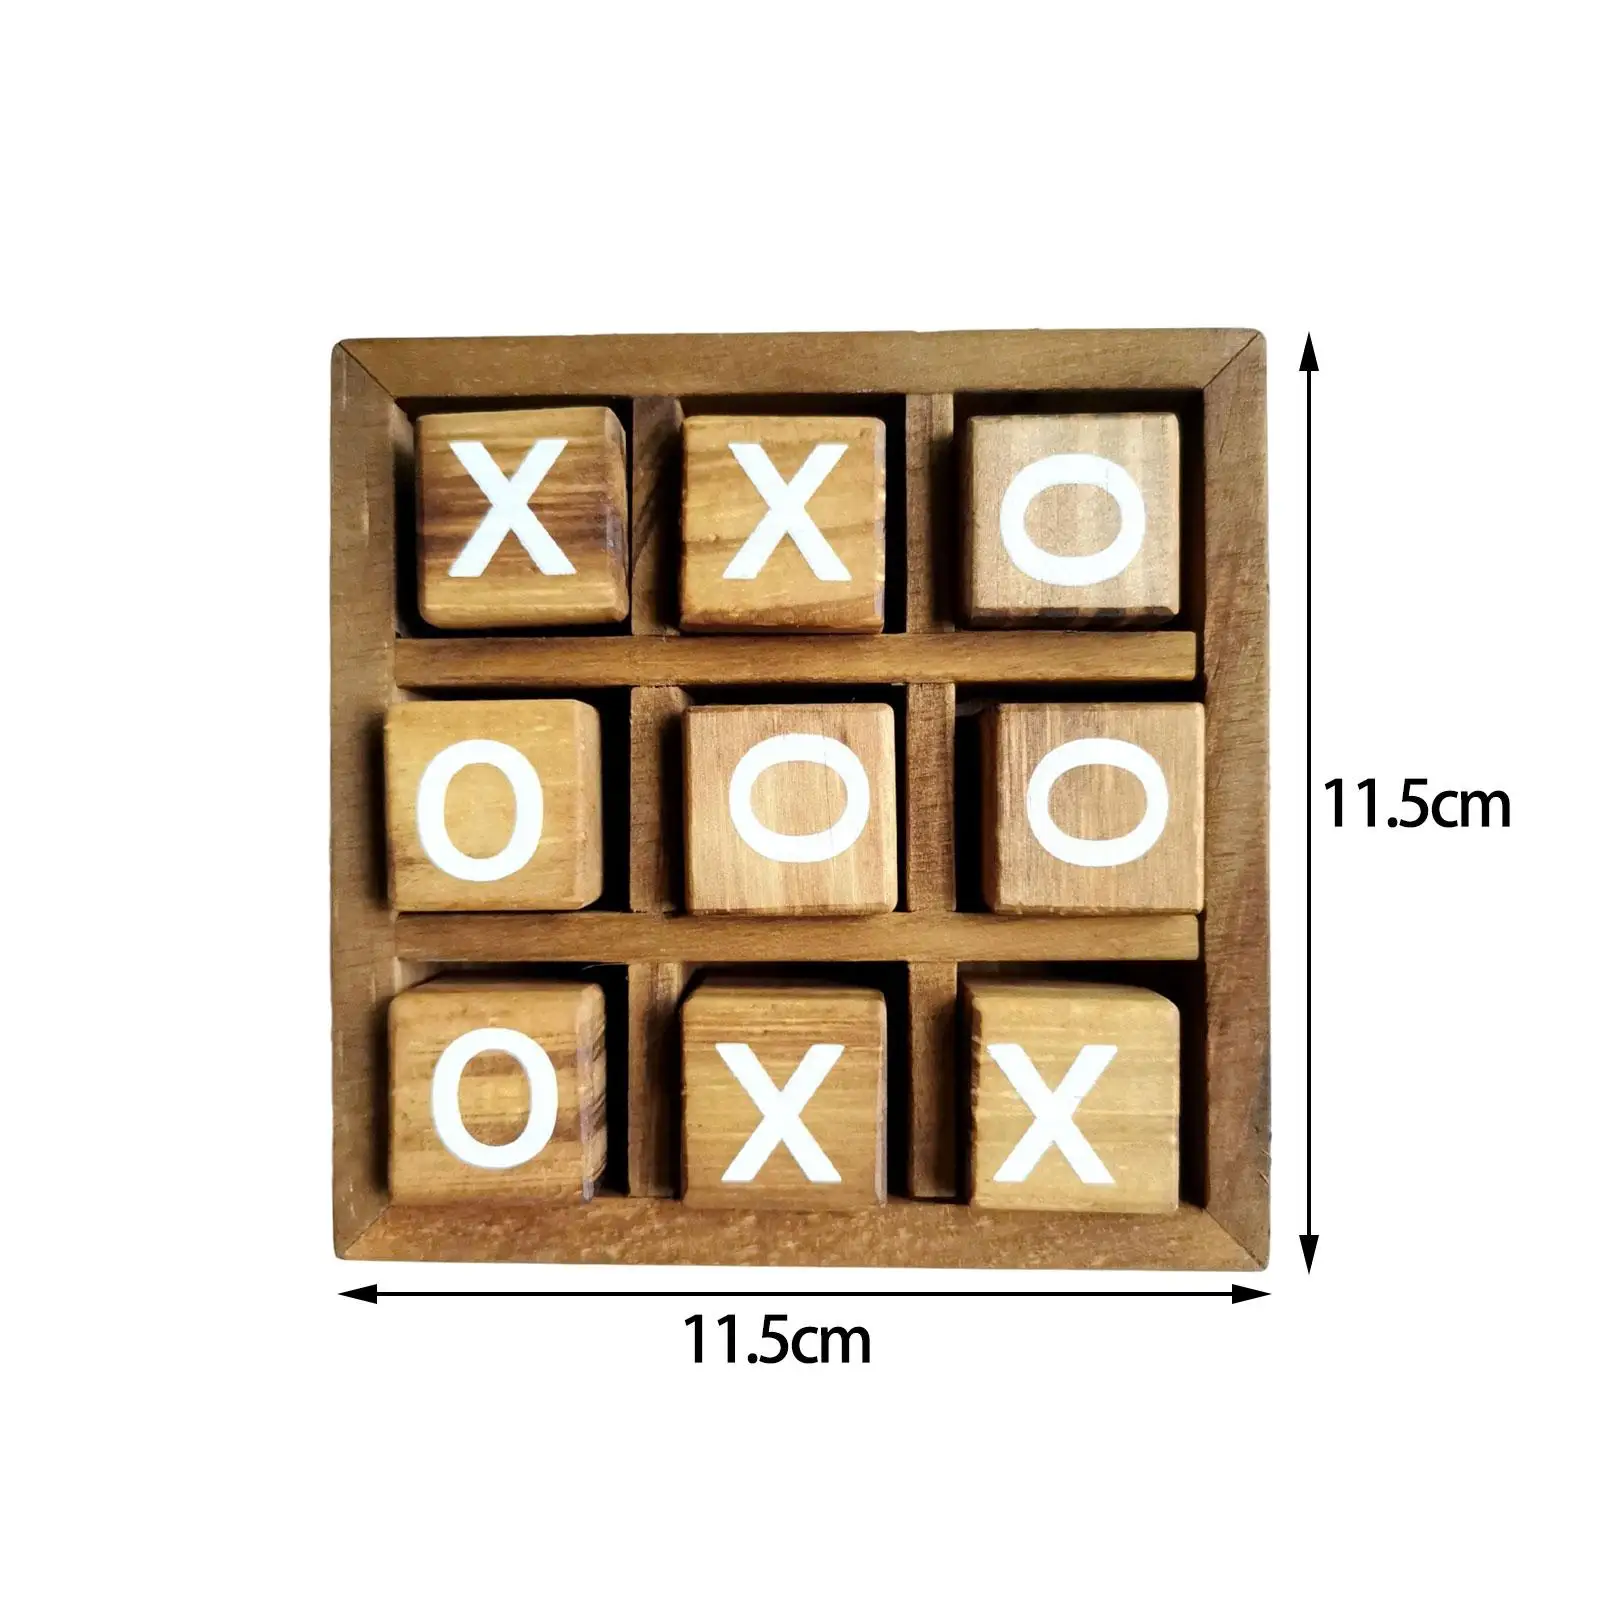 Wooden Tic TAC Toe Game Strategy Board Games Fun Indoor Brain Teaser Travel for Adults Living Room Family